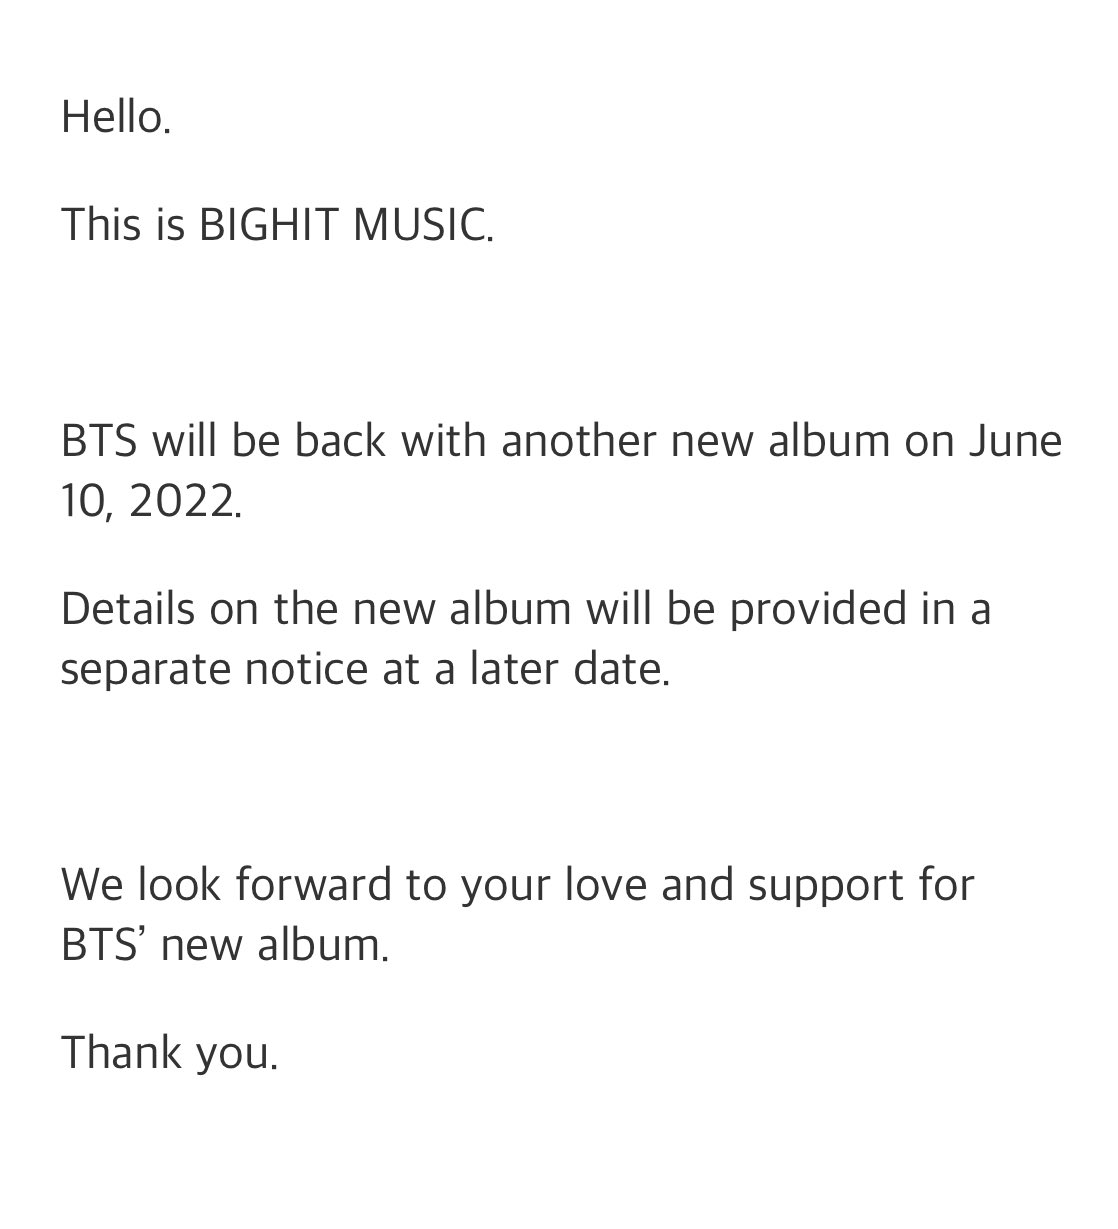 BTS Charts & Translations on X: The @BTS_twt 'Butter' Fanchant Guide is  now up on Weverse!   / X